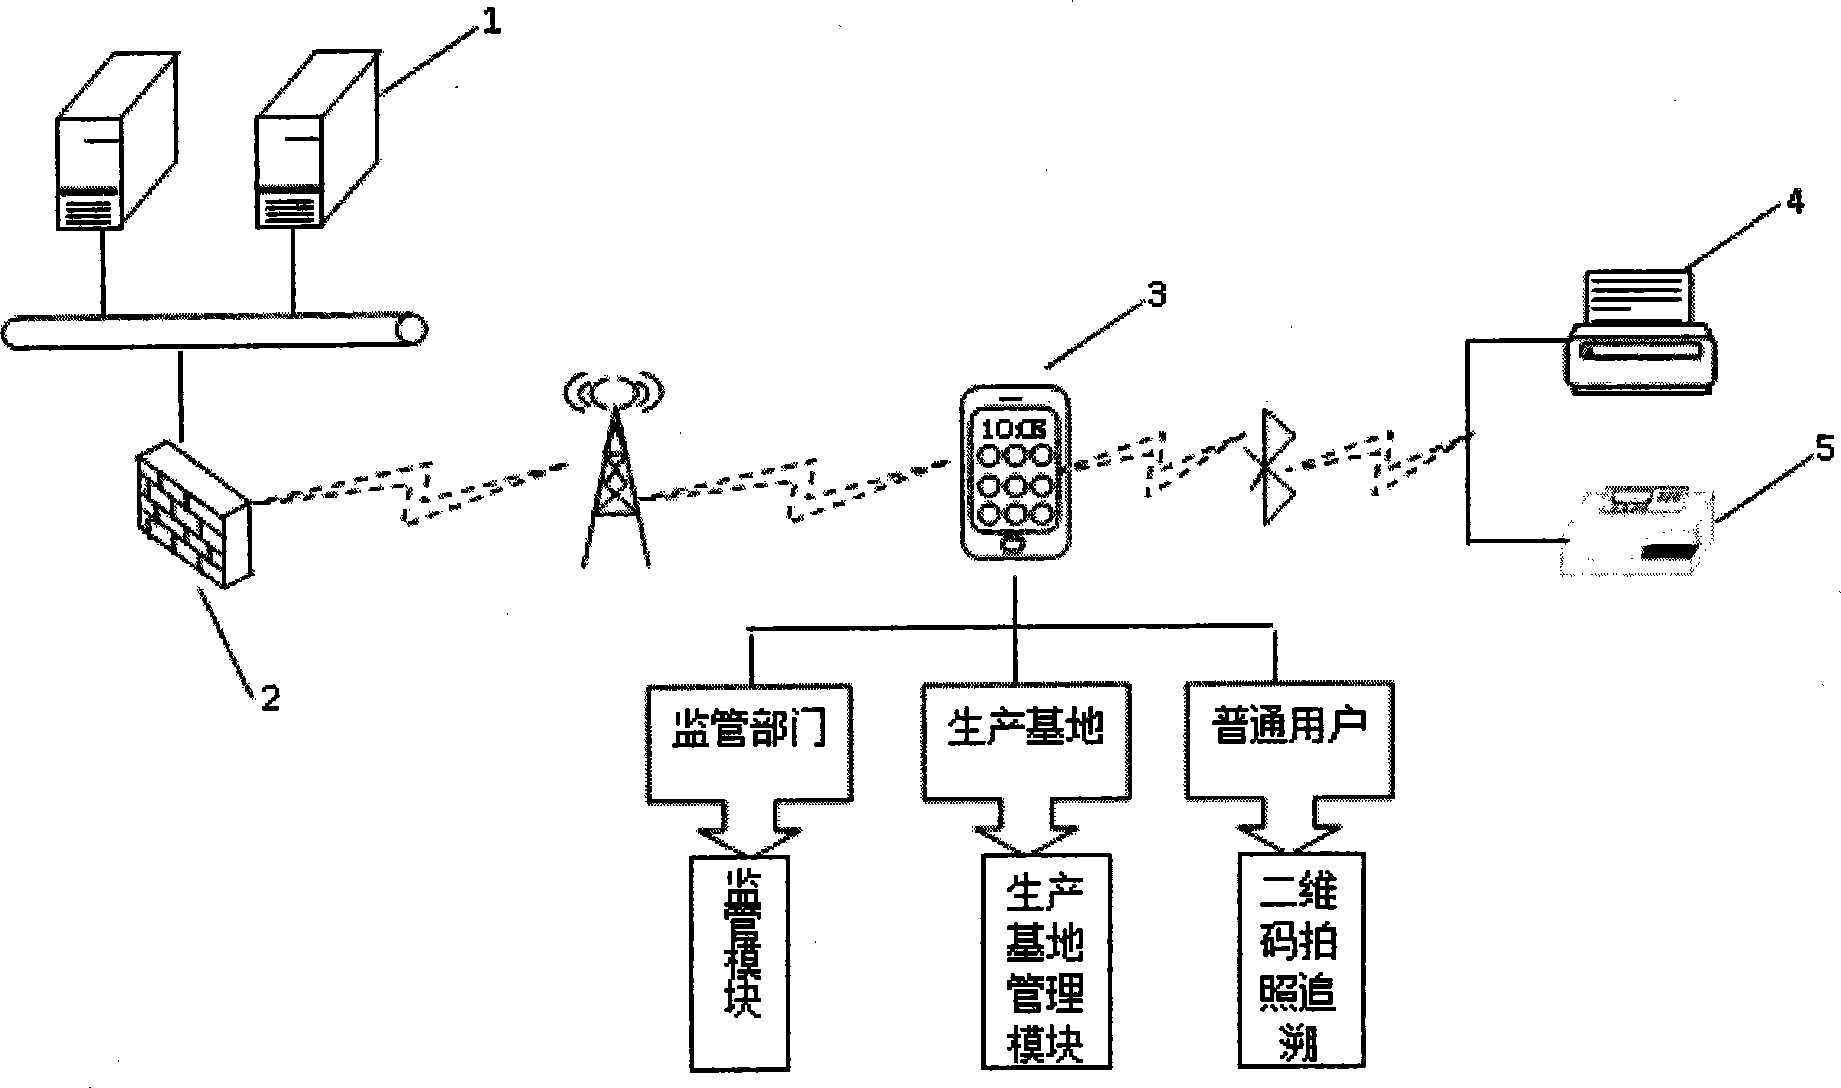 Agricultural product quality safety supervision system and method for APP